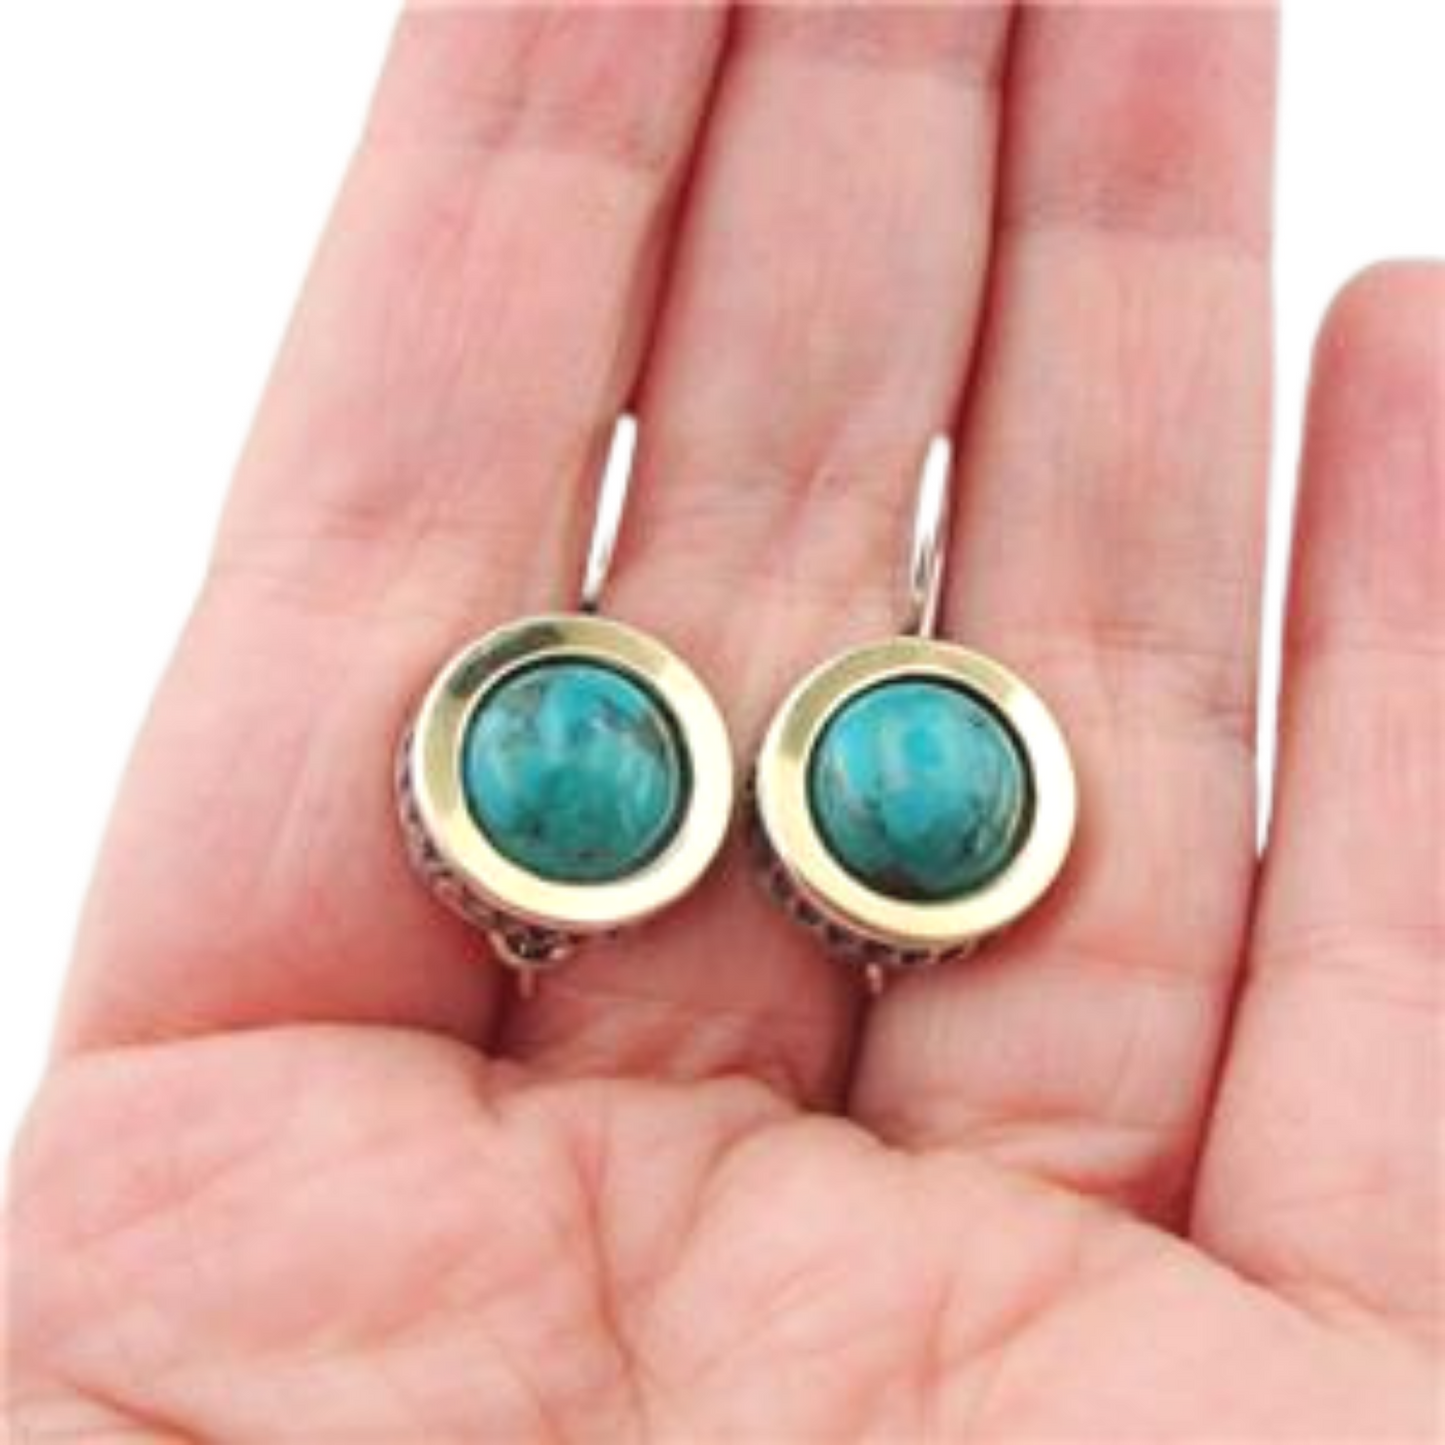 Sculptural Sterling Silver Earrings With Natural Turquoise Gemstones Decorated With a Yellow Gold Halo